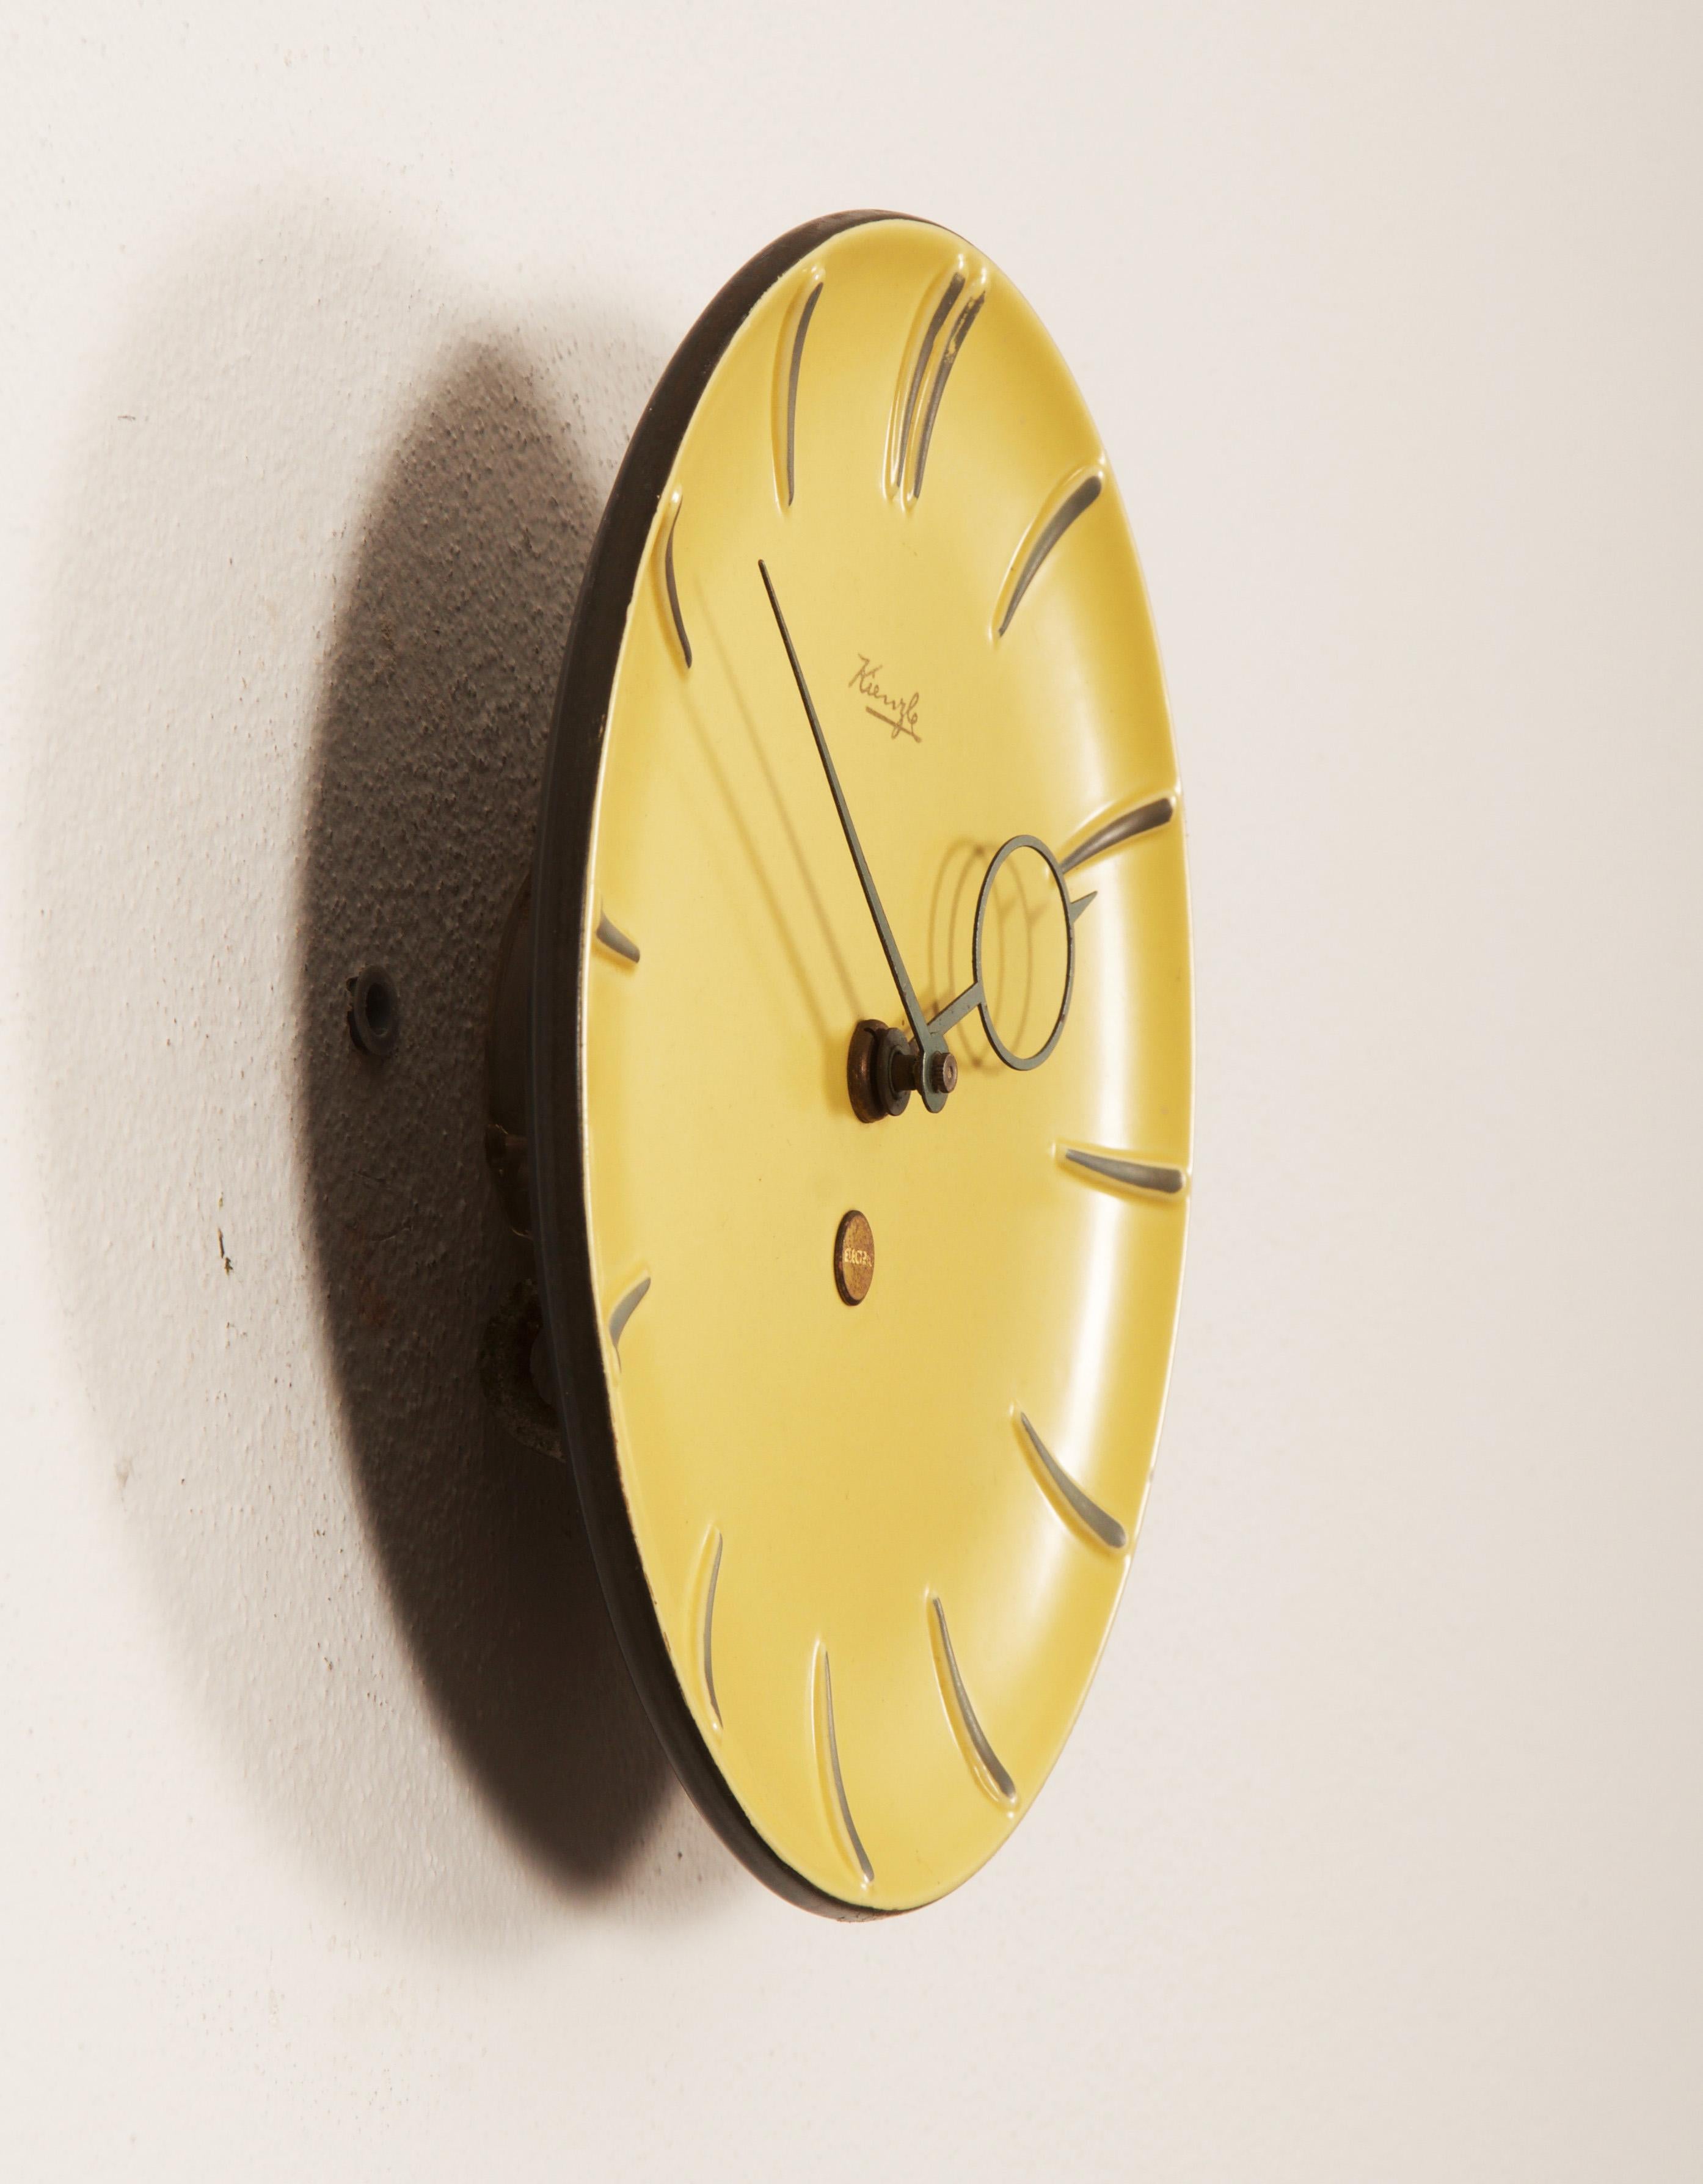 Ceramic clock face glazed and brass hands made by Kienzl in the late, 1950s. Fitted with a modern quartz movement with a battery.
     